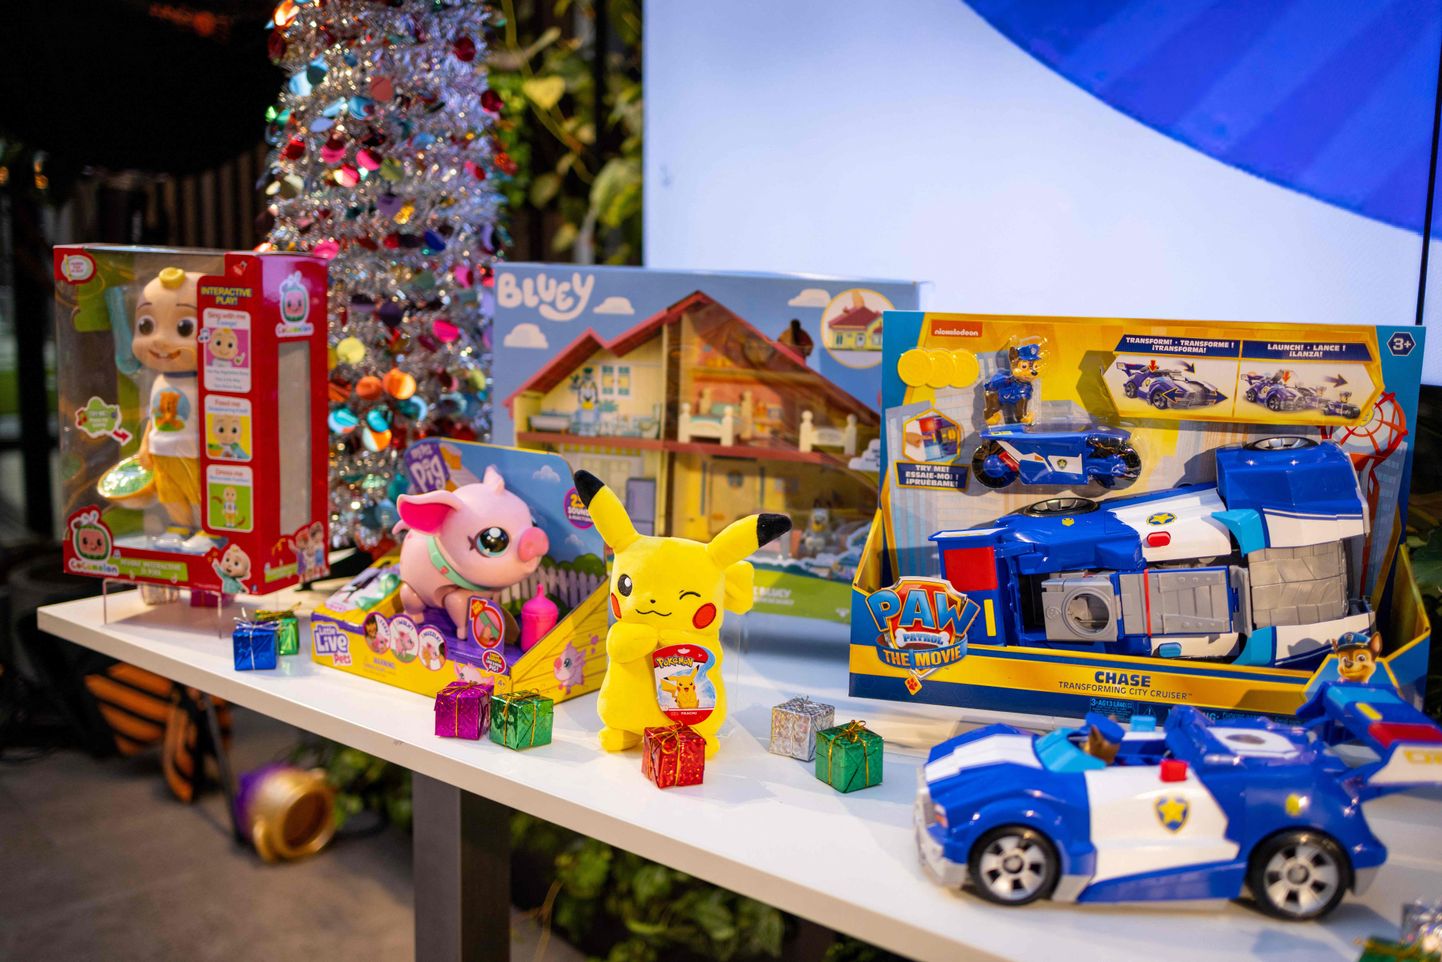 Toys are displayed during a photocall as DreamToys predicts the 12 most sought after toys by kids this Christmas in central London on November 2, 2021. (Photo by Tolga Akmen / AFP)